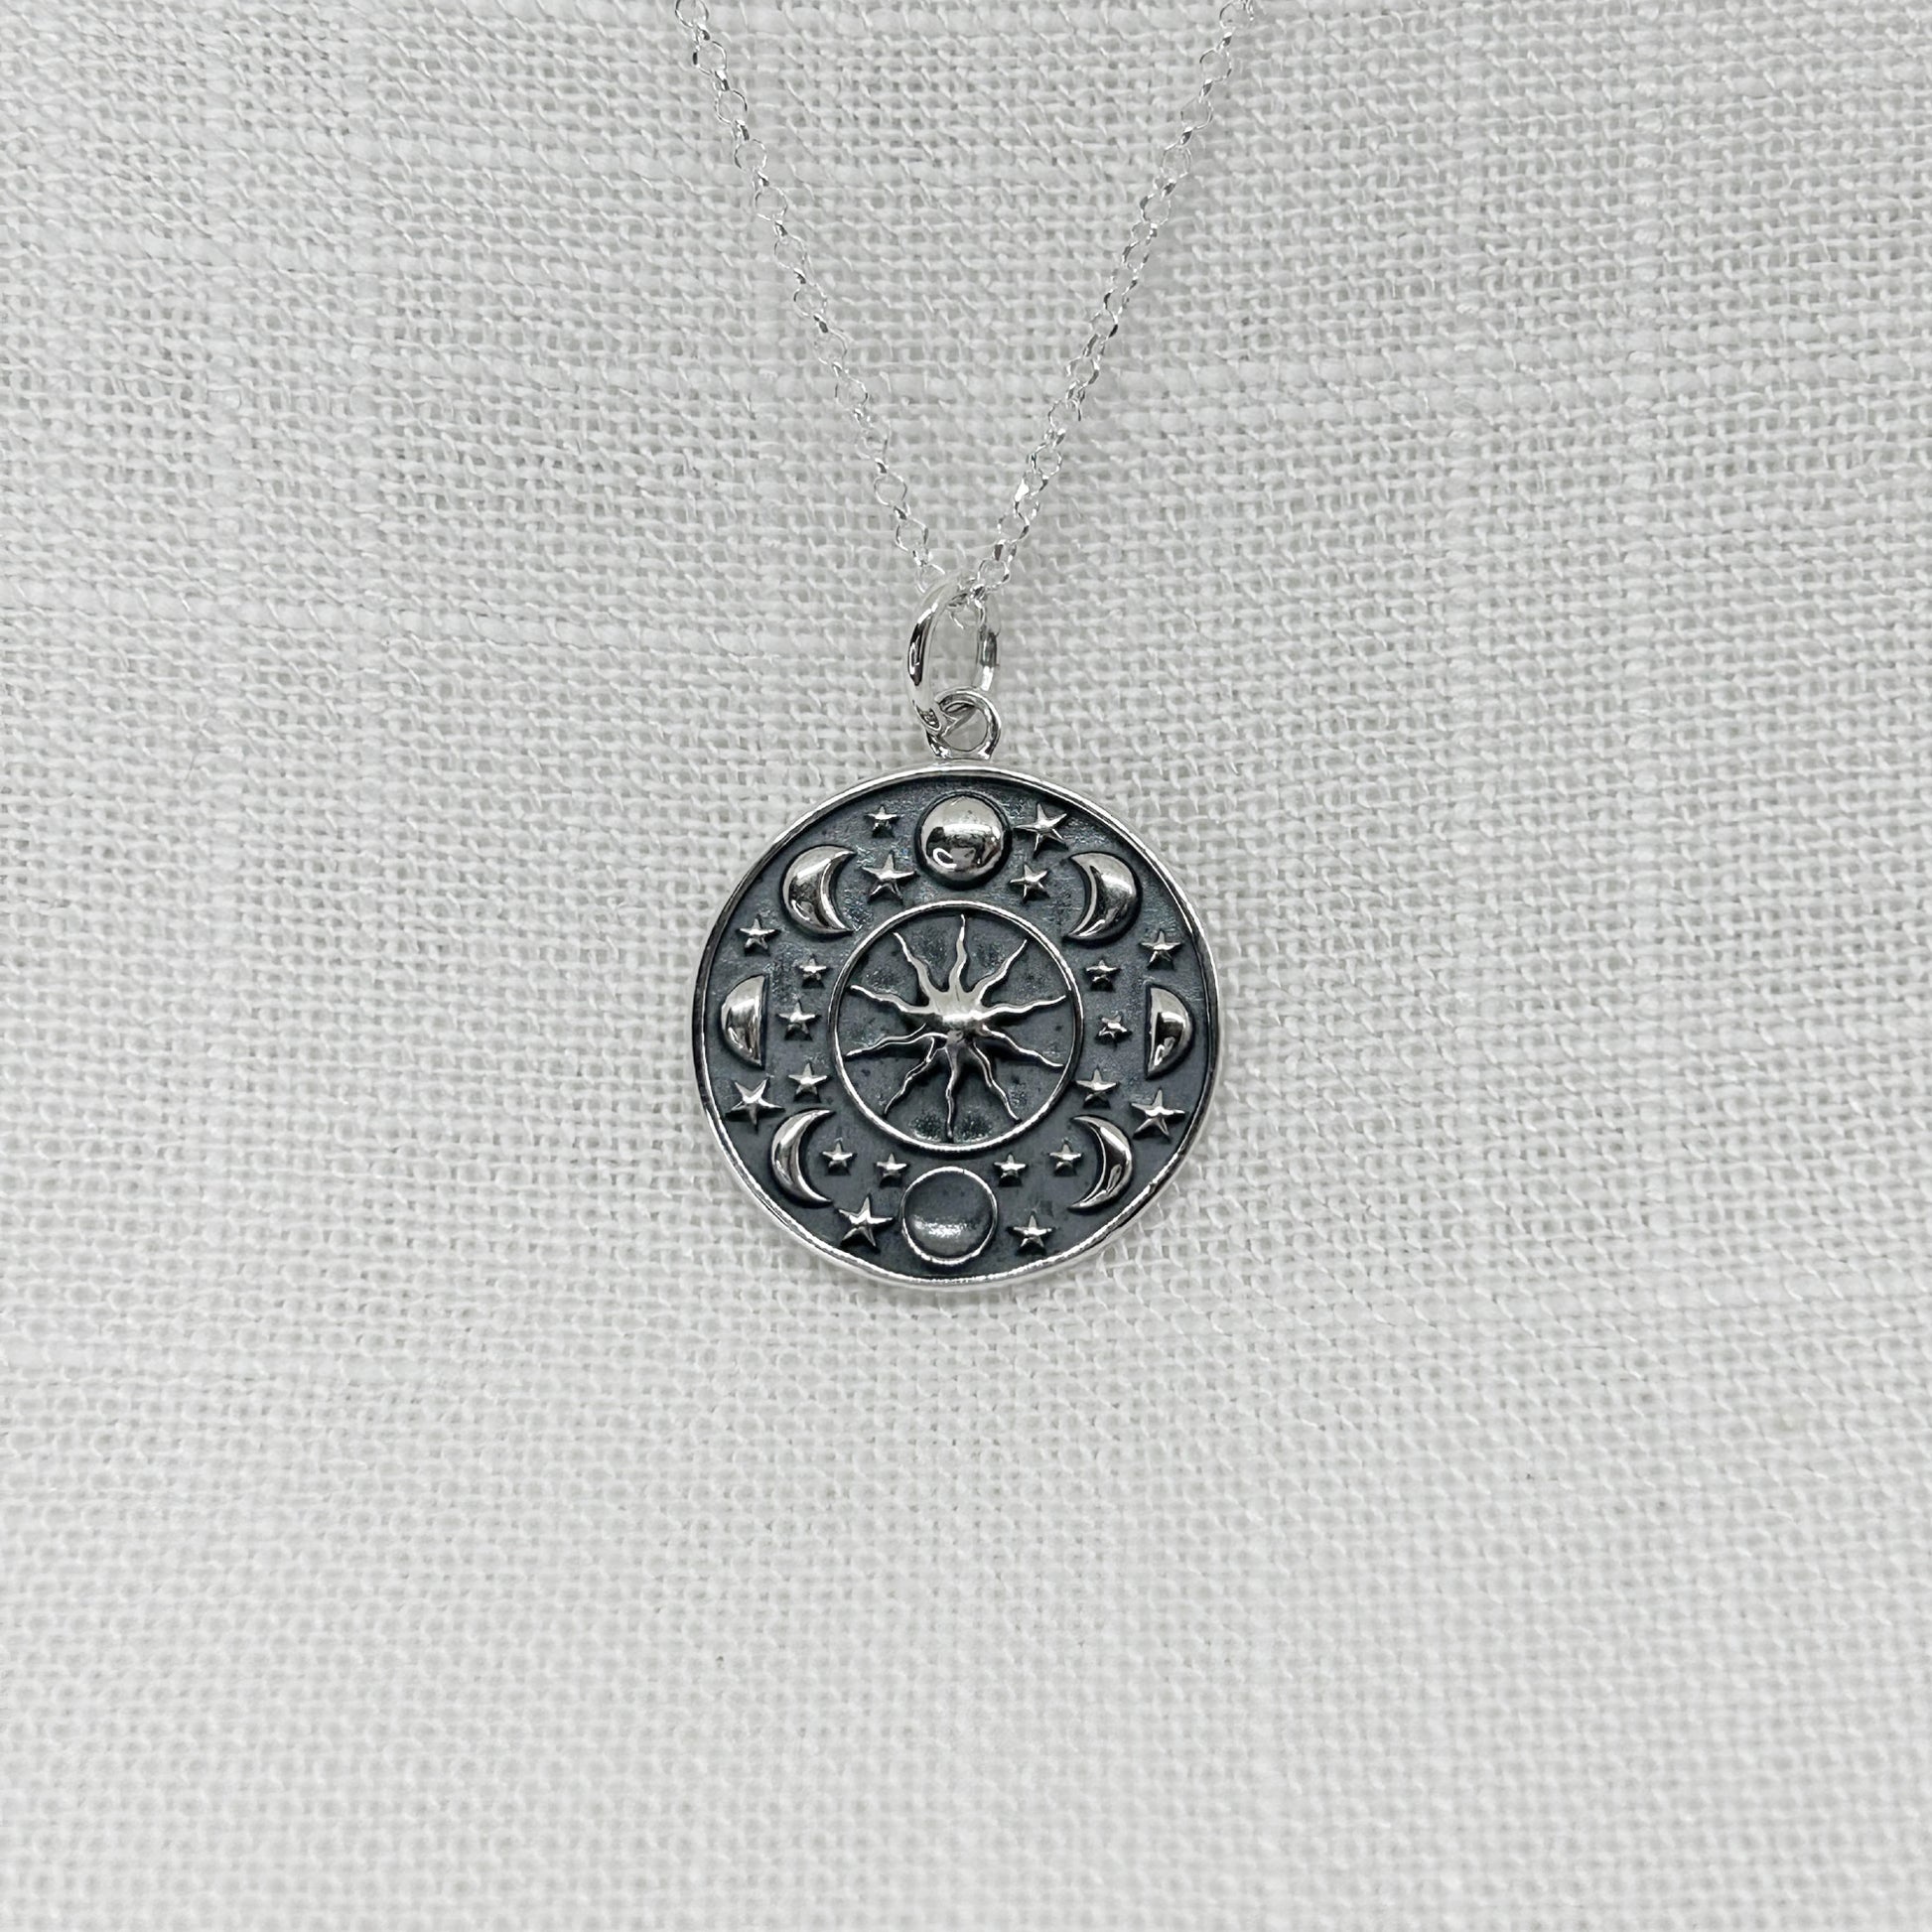 This circular pendant features each phase of the moon and stars. Within the centre, is a sun with its rays shining brightly. A truly cosmic piece! The pendant has a high polish and has been slightly oxidised to show as much detail as possible. The pendant is approximately 2cm in diameter and comes complete on a 20 inch silver chain. All jewellery comes in a tarnish proof bag inside a gift box.